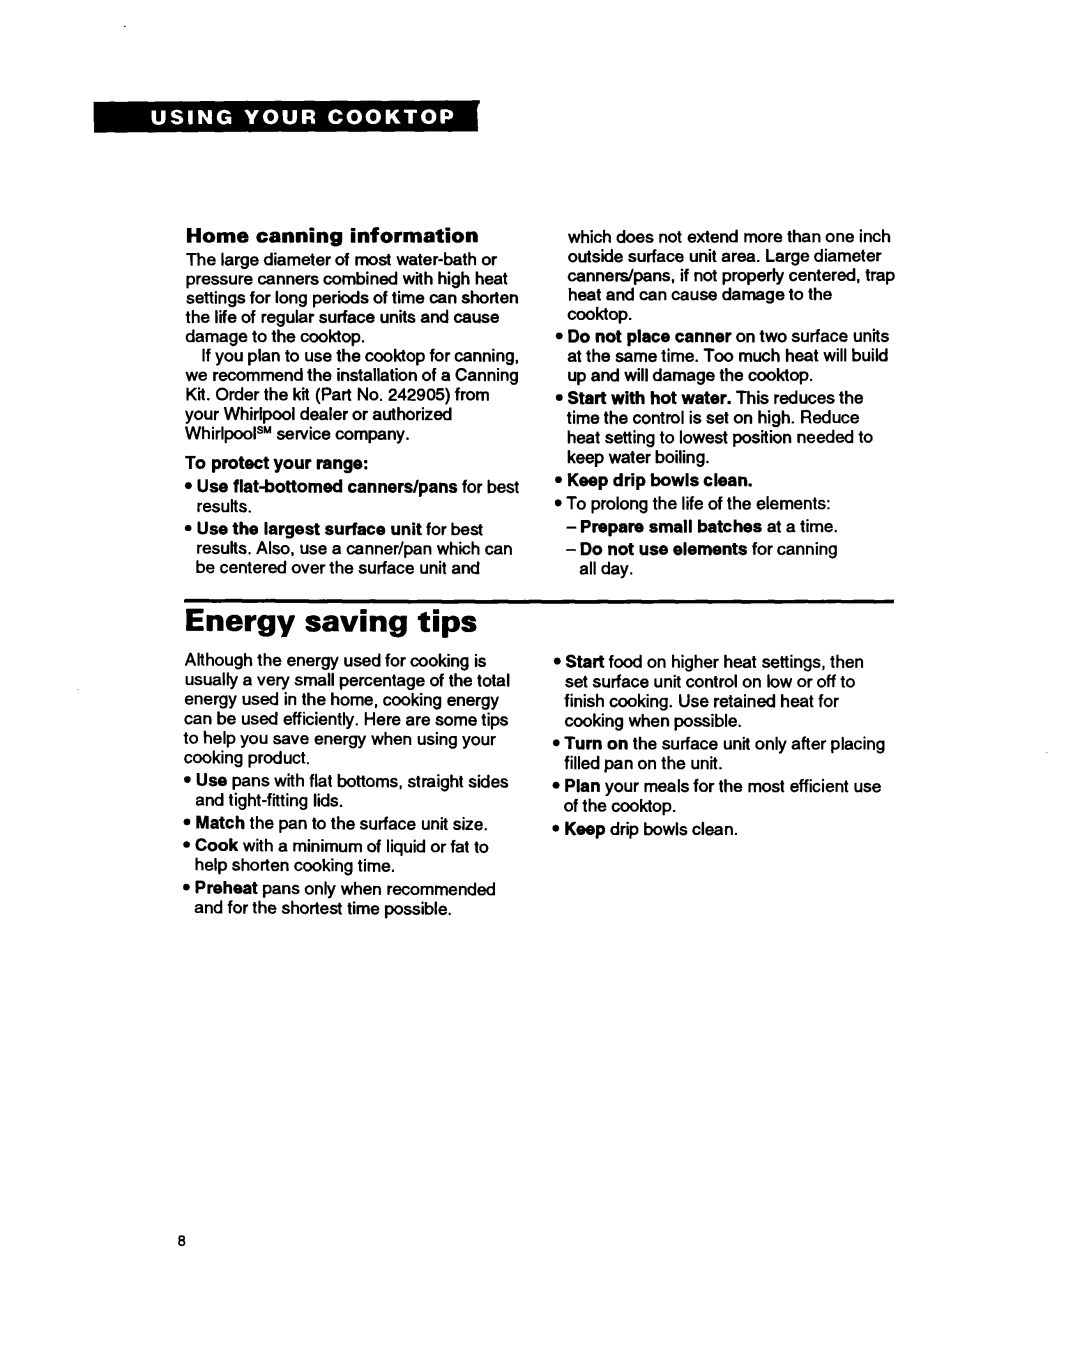 Whirlpool RC8400XA Energy saving tips, Home canning information, To protect your range, Keep drip bowls clean 